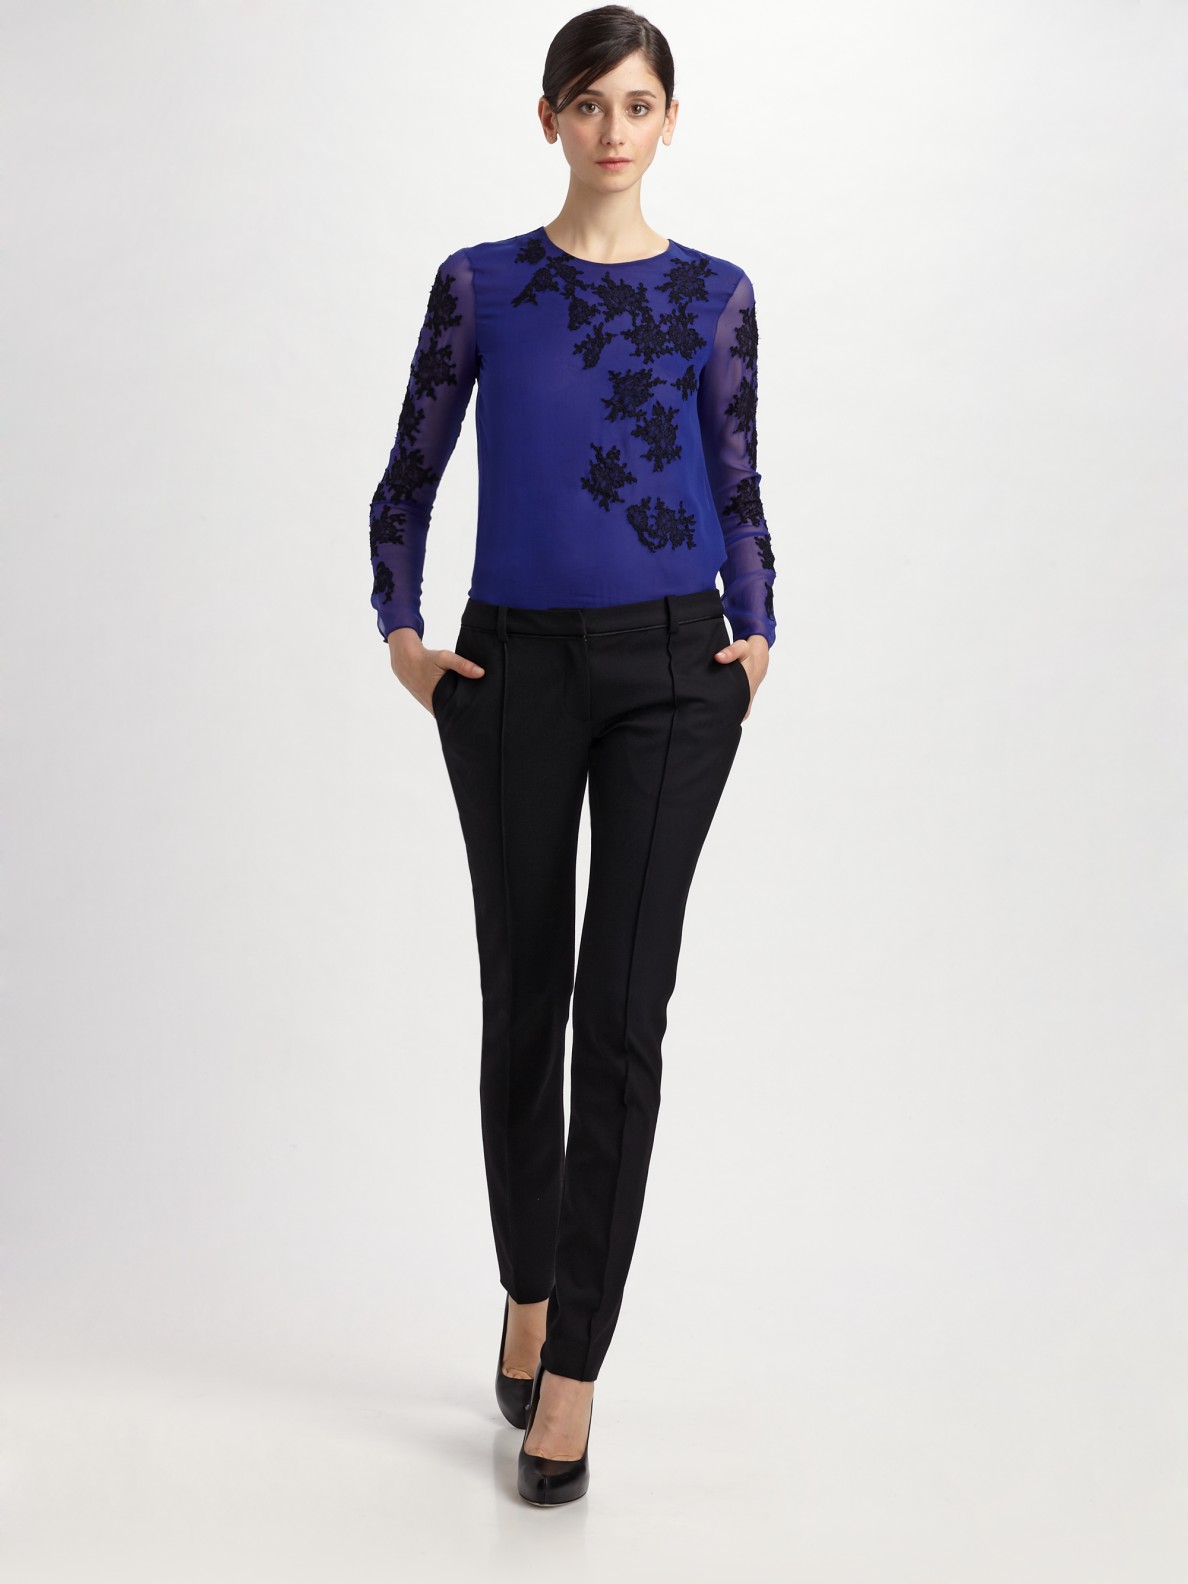 Jason Wu Silk Chiffon Lace Embroidered Blouse in Purple (violet) | Lyst